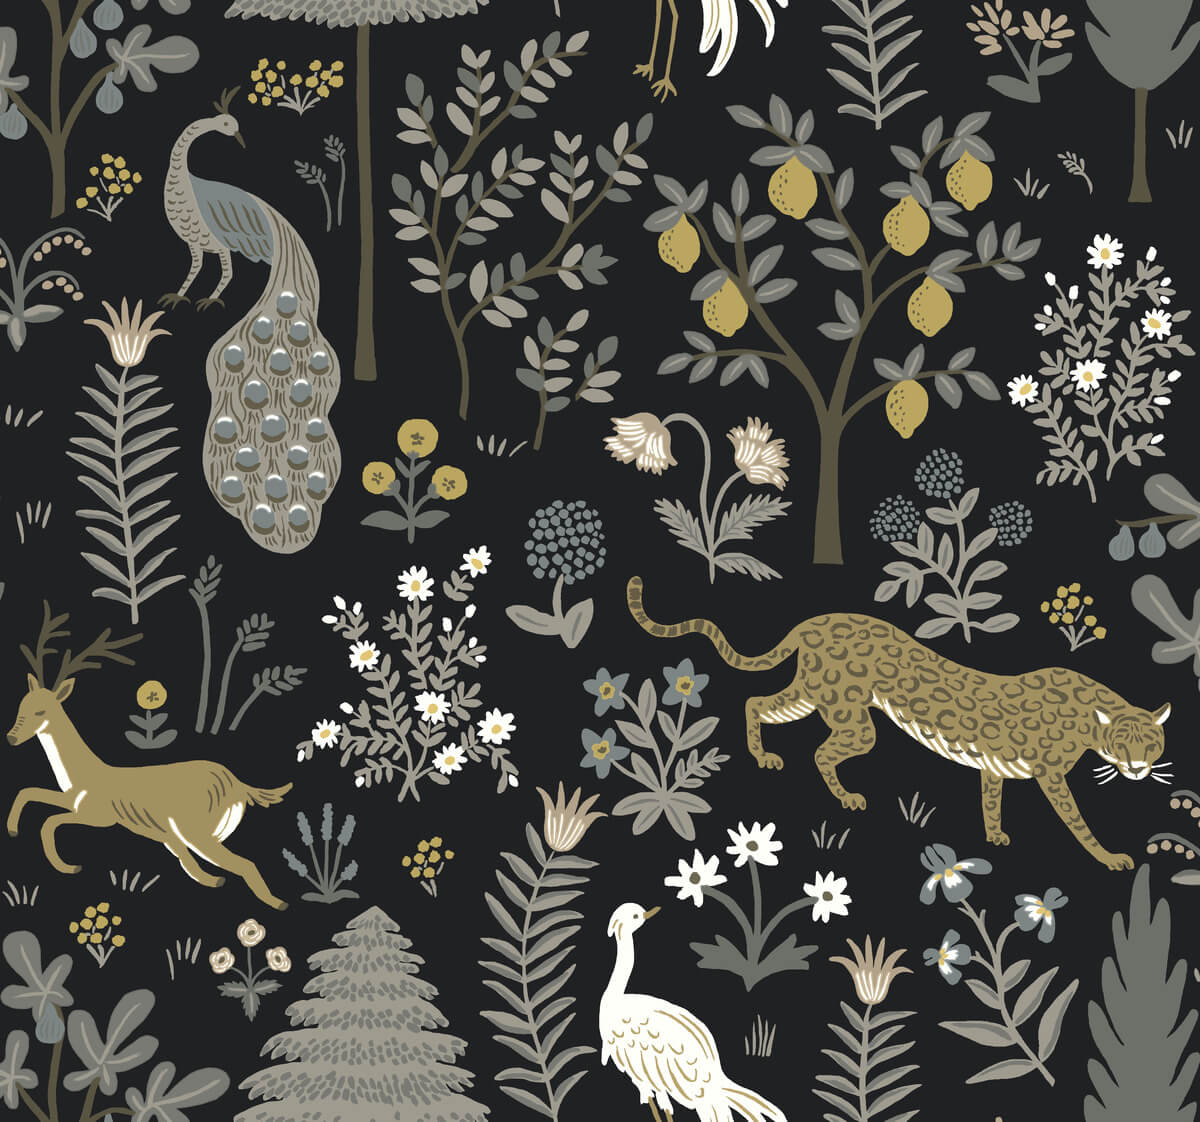 Rifle Paper Co. Second Edition Menagerie Wallpaper - Black